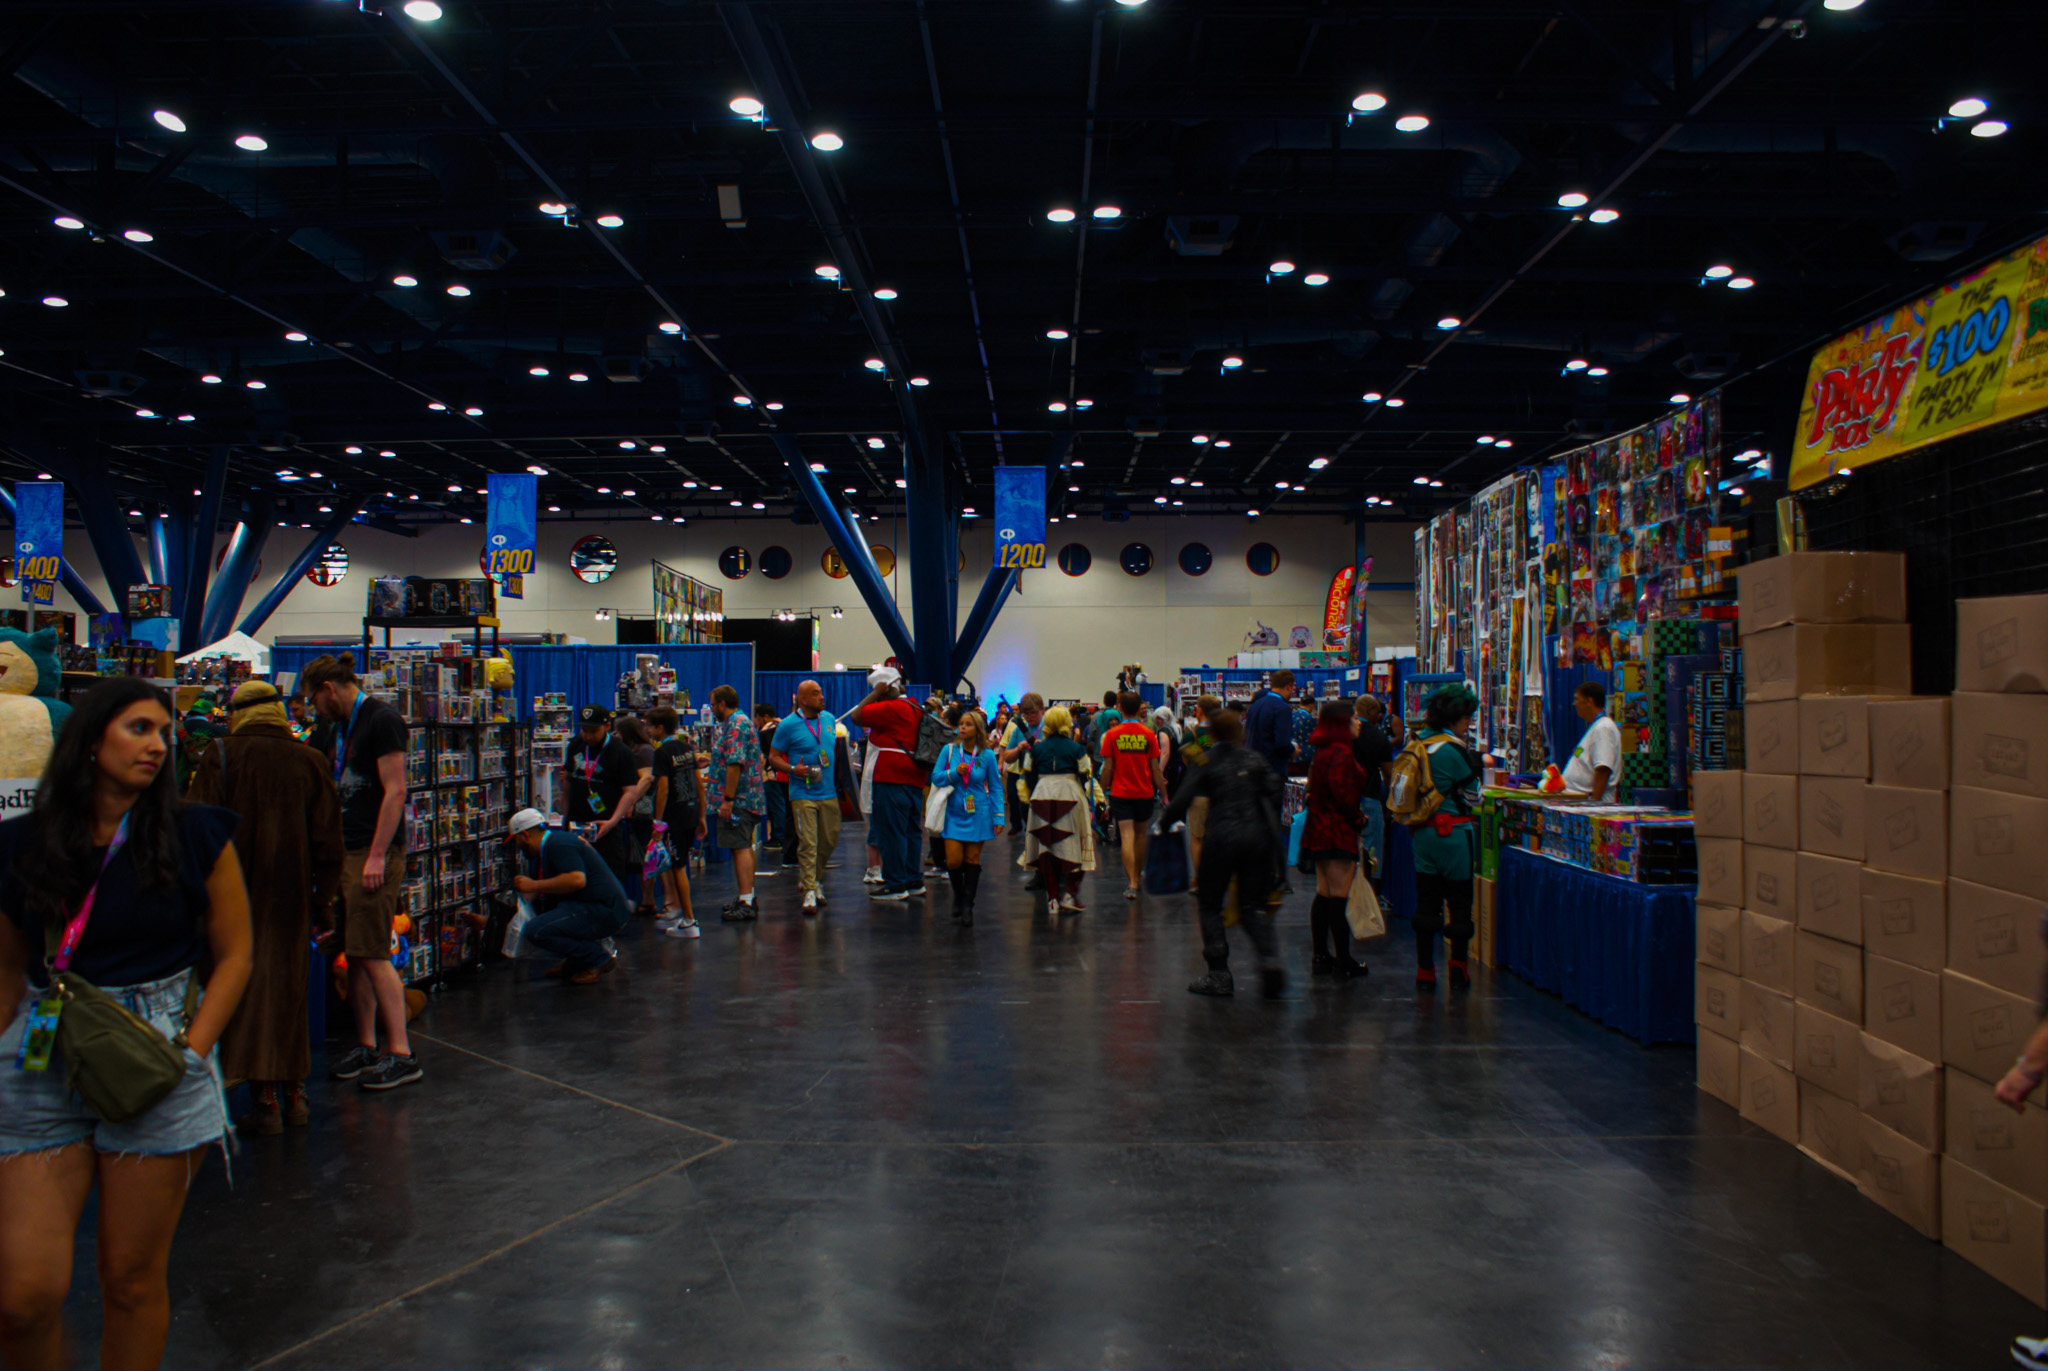 Standard sight at the convention, crowded walkways and cosplays everywhere. Photo by reporter Adan Martinez.